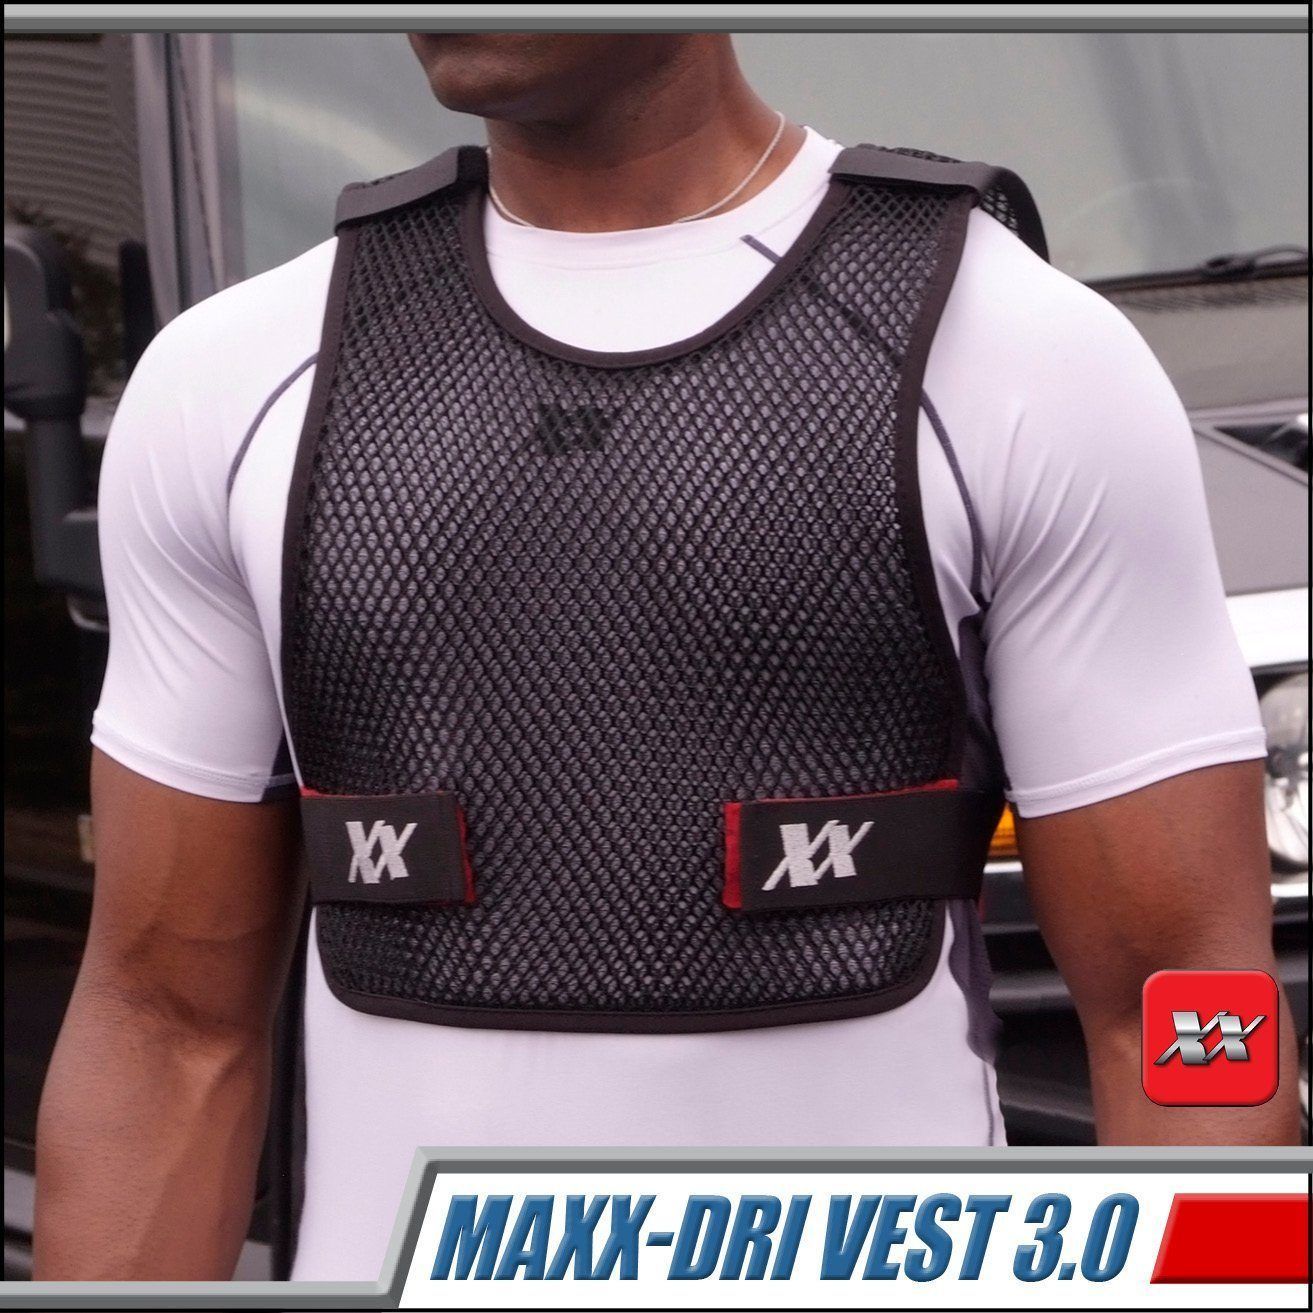 Police Officer Invents New Body Armor Ventilation and Cooling Vest Device To Battle Excessive Sweat, Odor and Discomfort While Wearing Body Armor